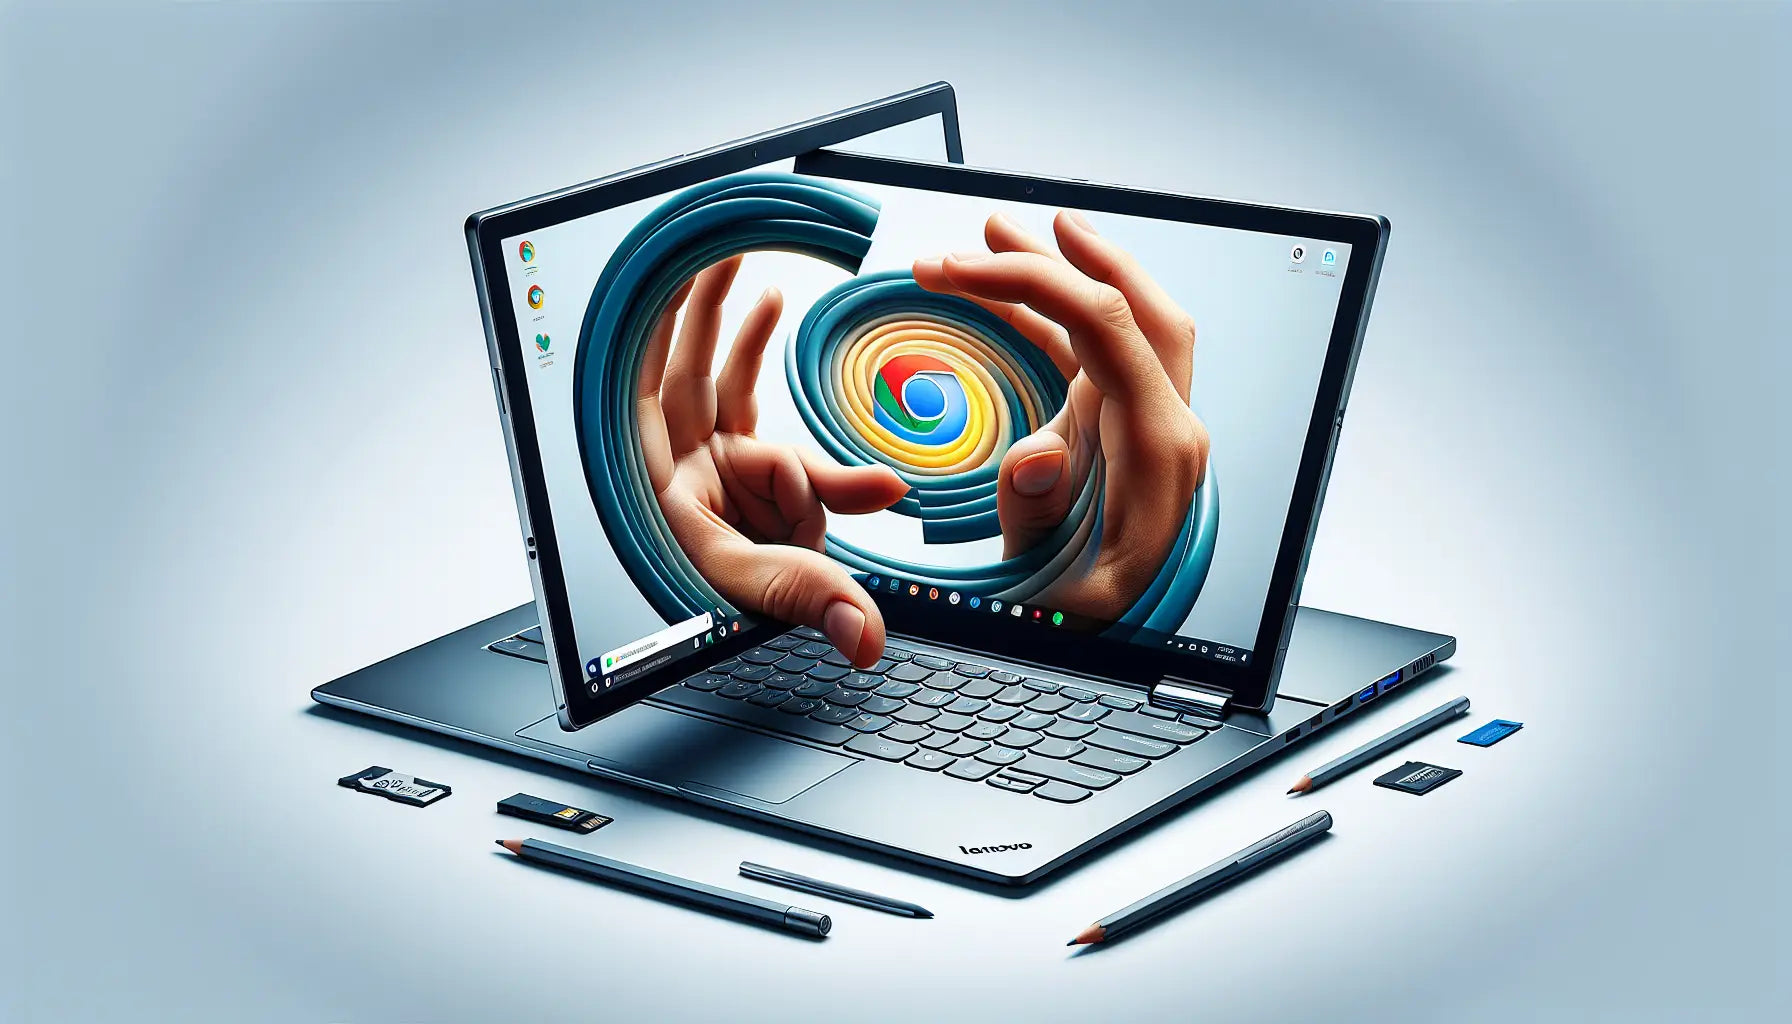 Discover the Lenovo 300e 11.6-Inch 2 In 1 Laptop: A Versatile Chromebook for All Your Needs